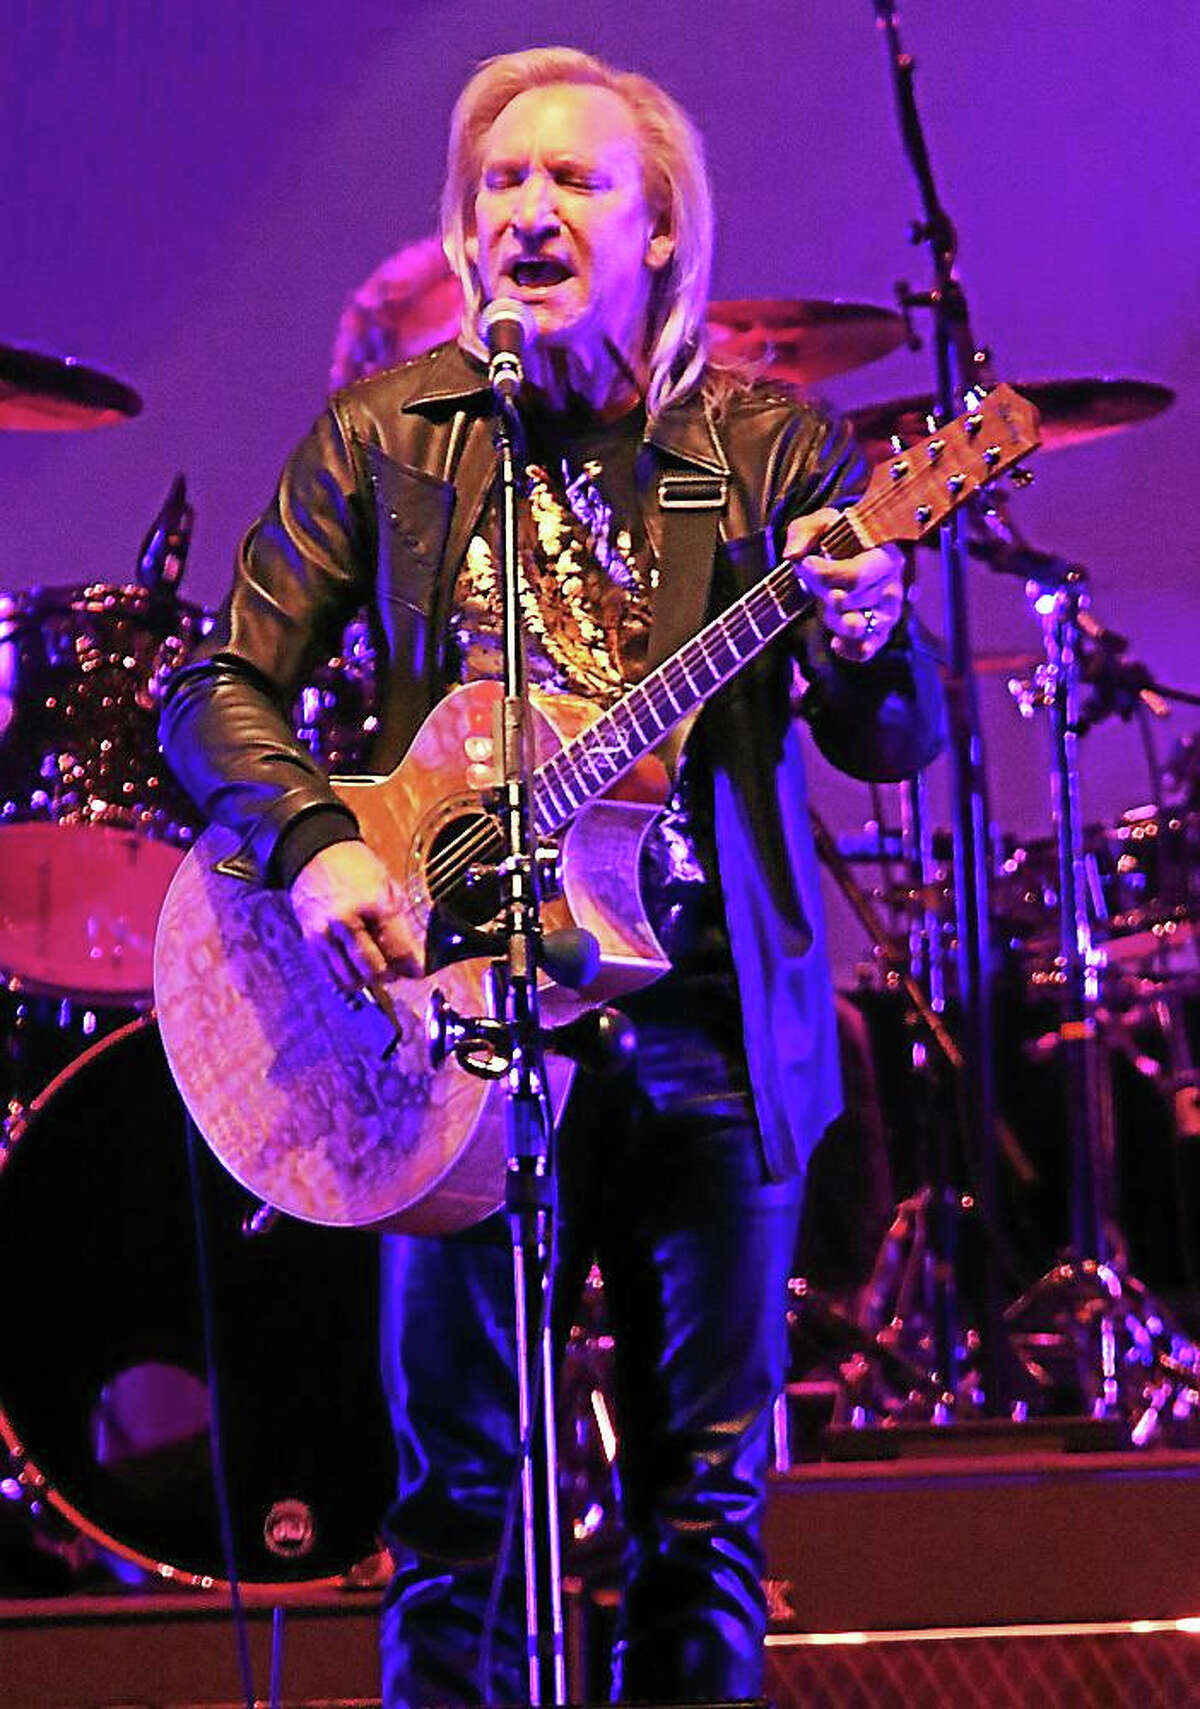 Photo by John Atashian Singer, songwriter and multi-instrumentalist Joe Walsh is shown performing to a full house of fans at the Mohegan Sun Arena in Uncasville Oct. 16. Joe played songs from his 40 year music career, which included material from The James Gang, The Eagles and his solo material.